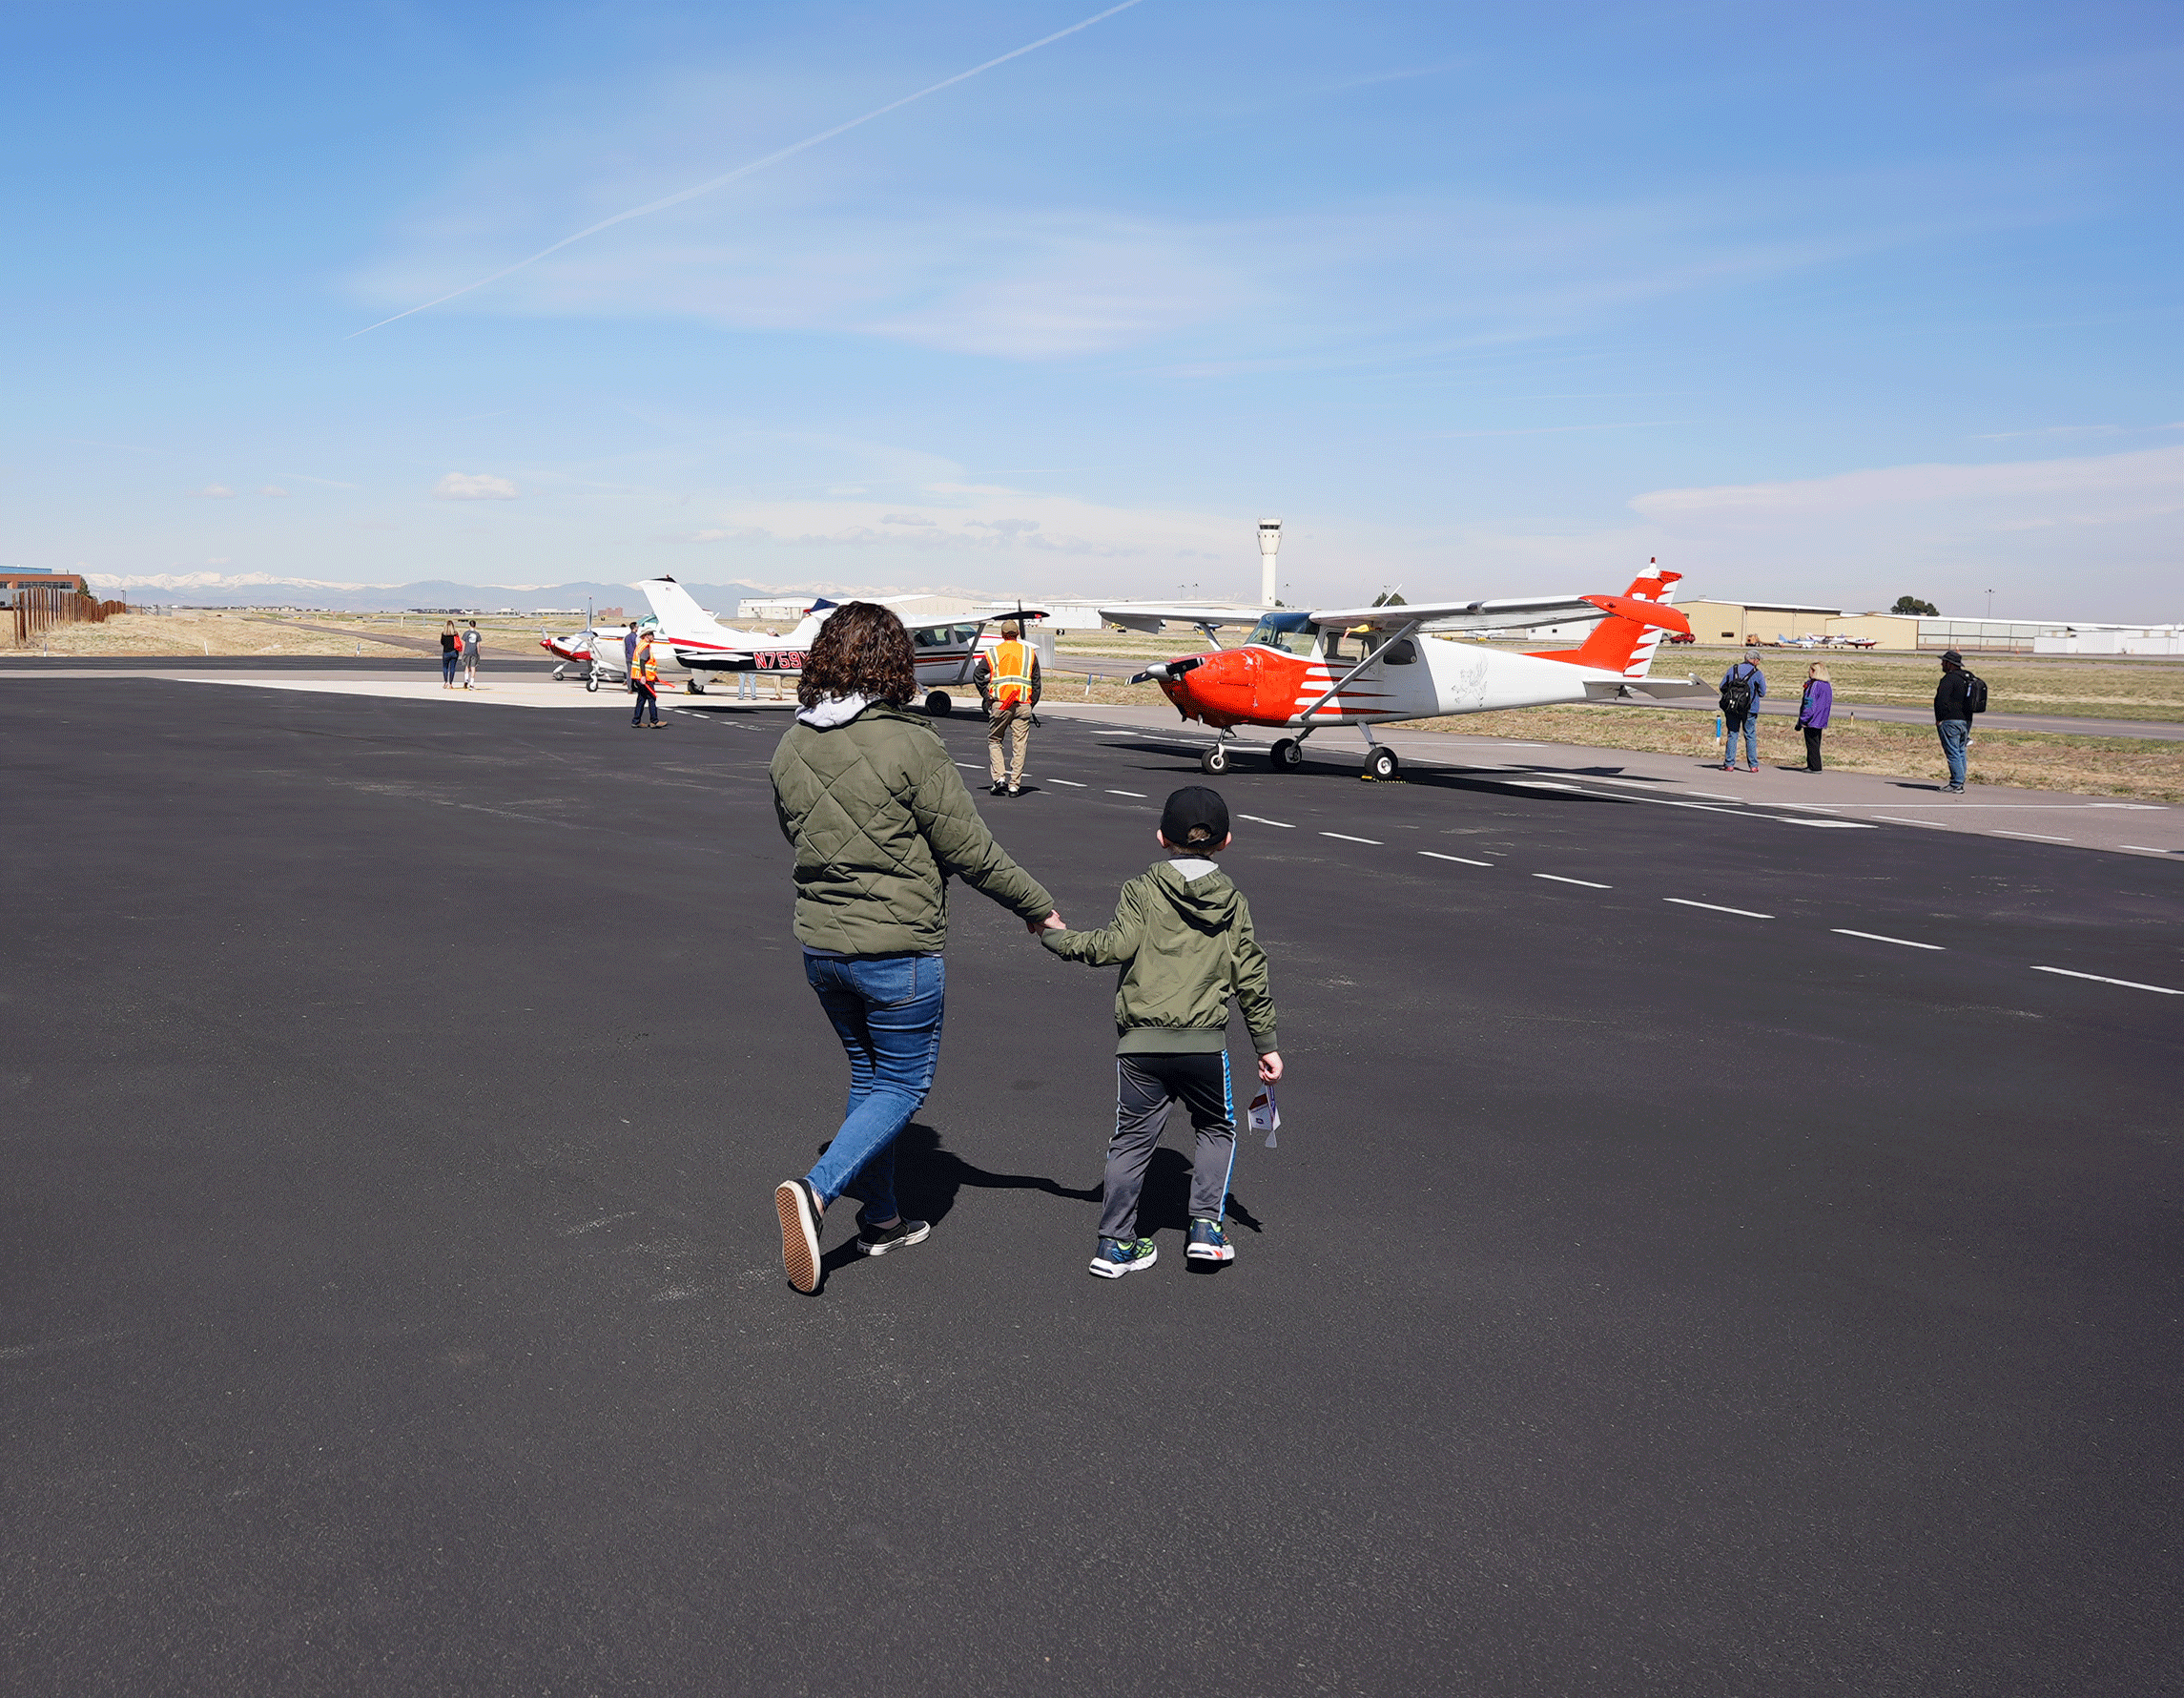 Mother & son looking at aircraft on the flight ramp at Exploration of Flight